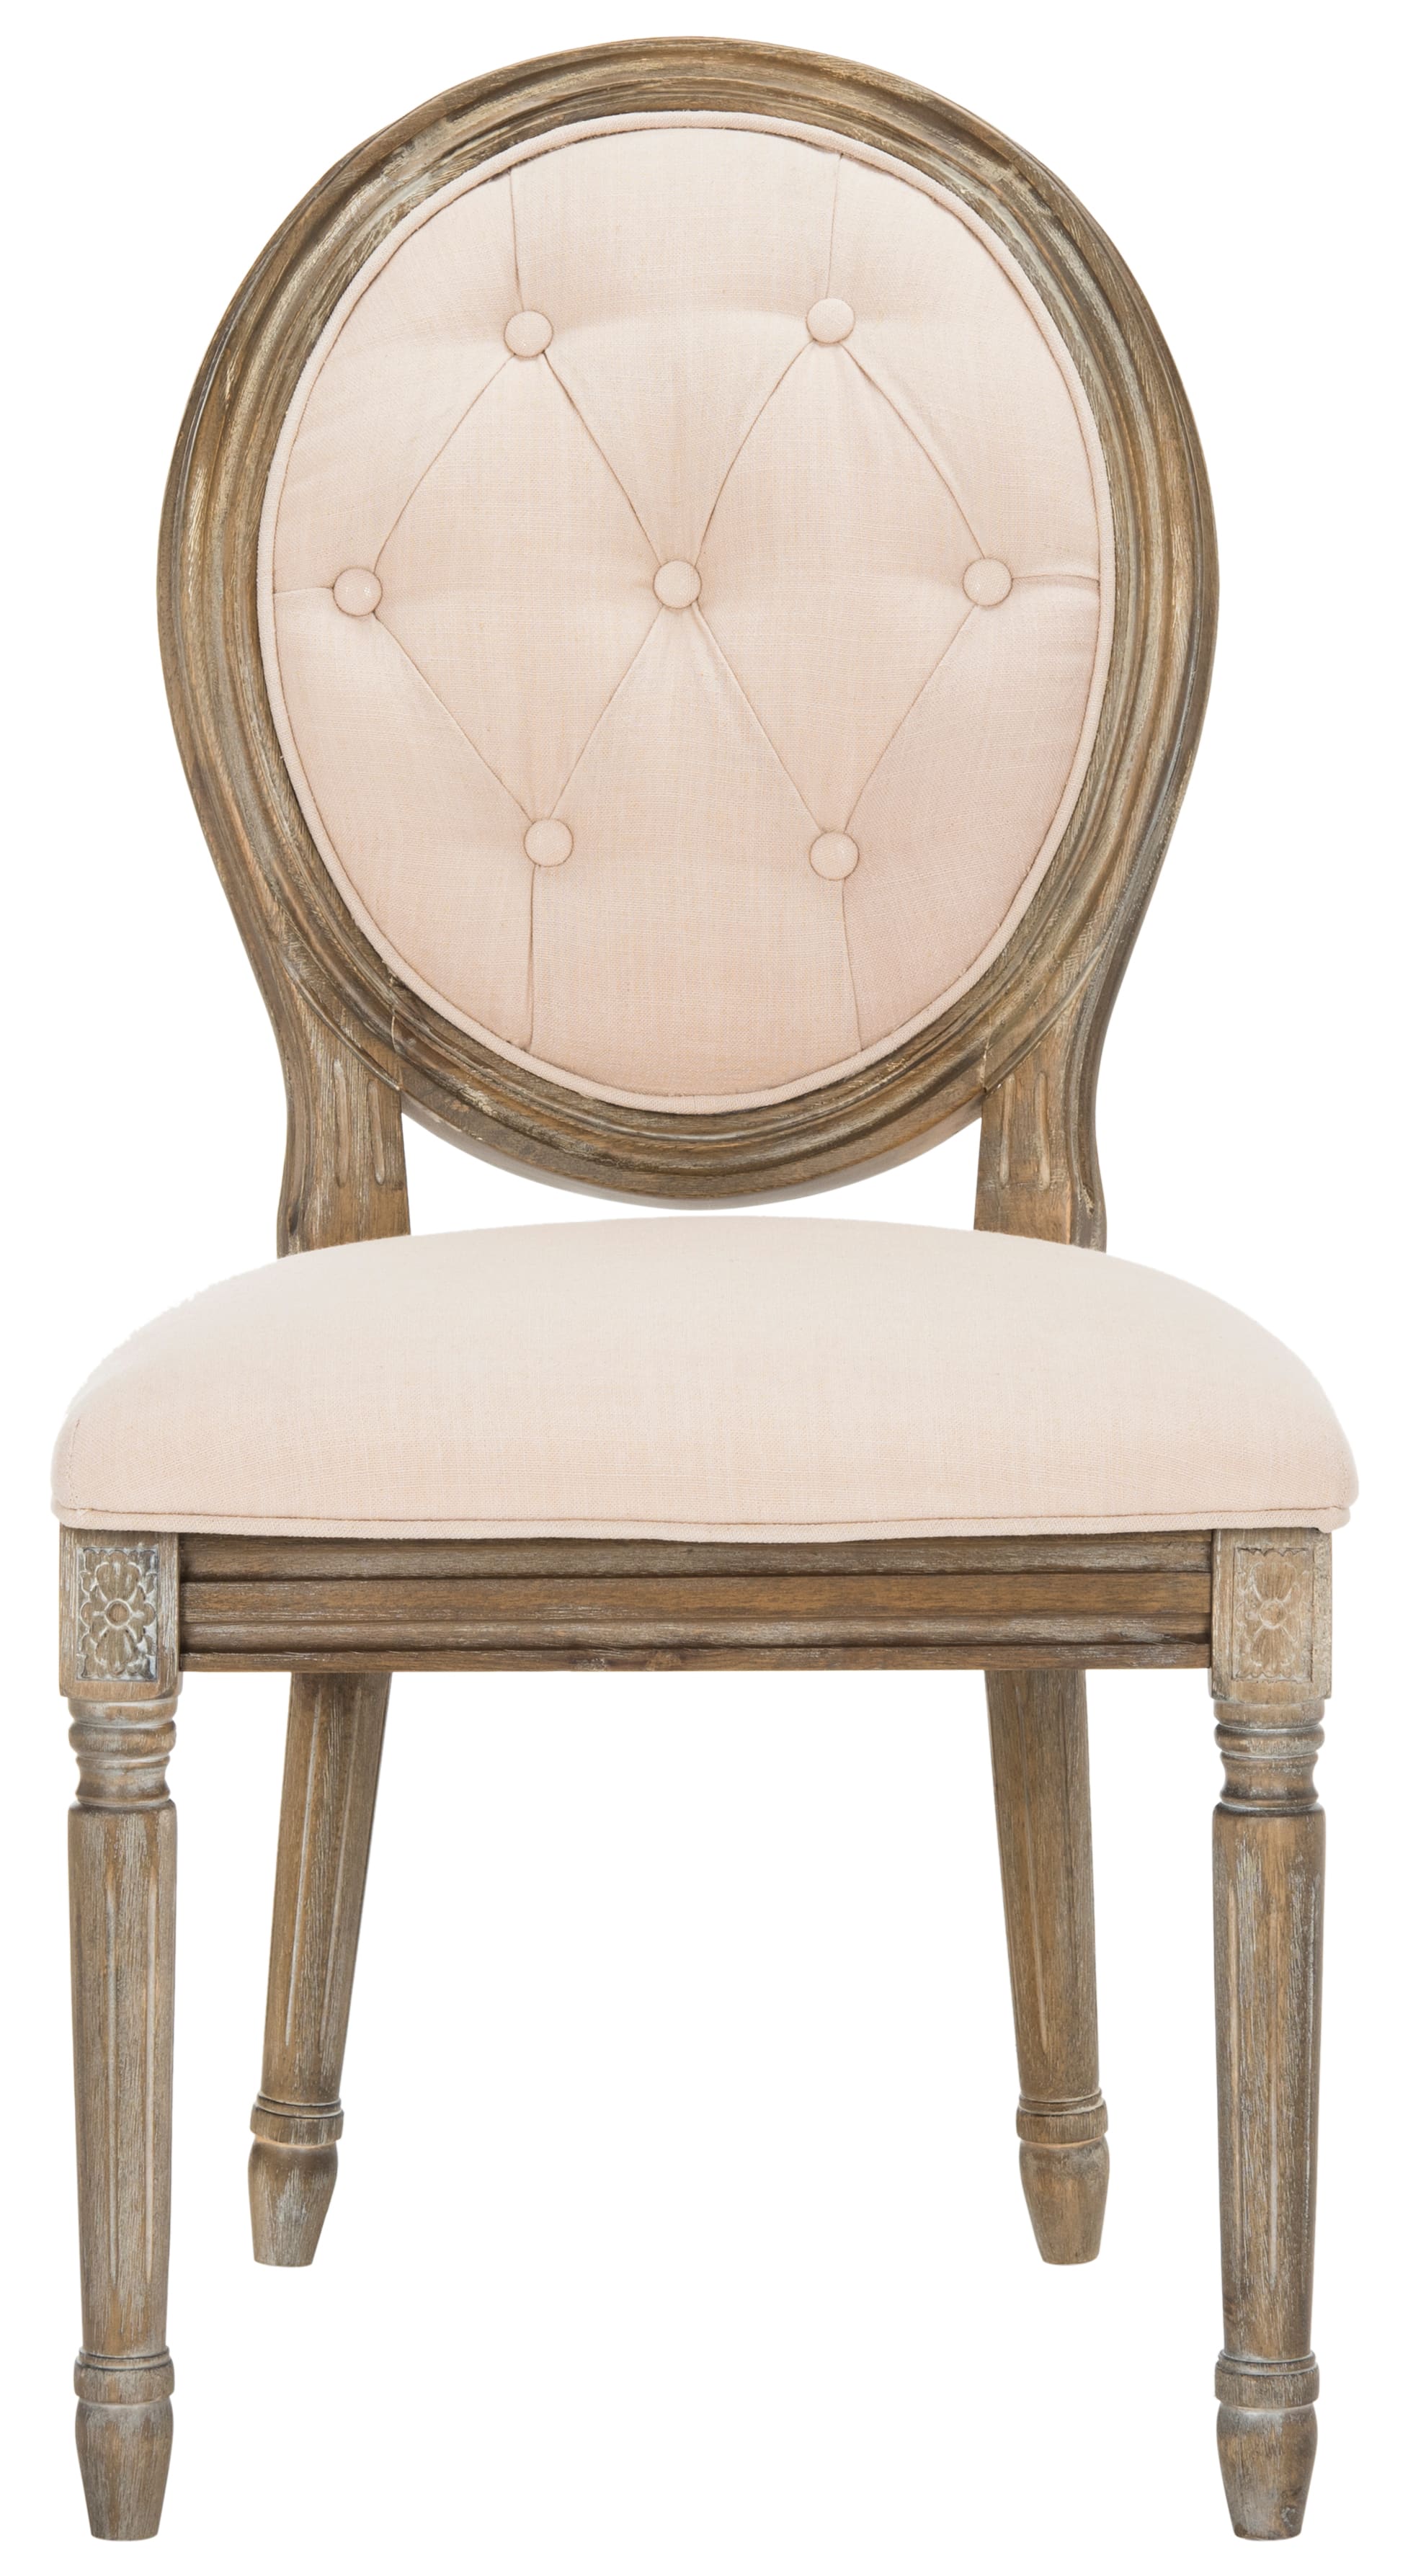 Holloway Tufted Oval Side Chair Set of 2 in Beige